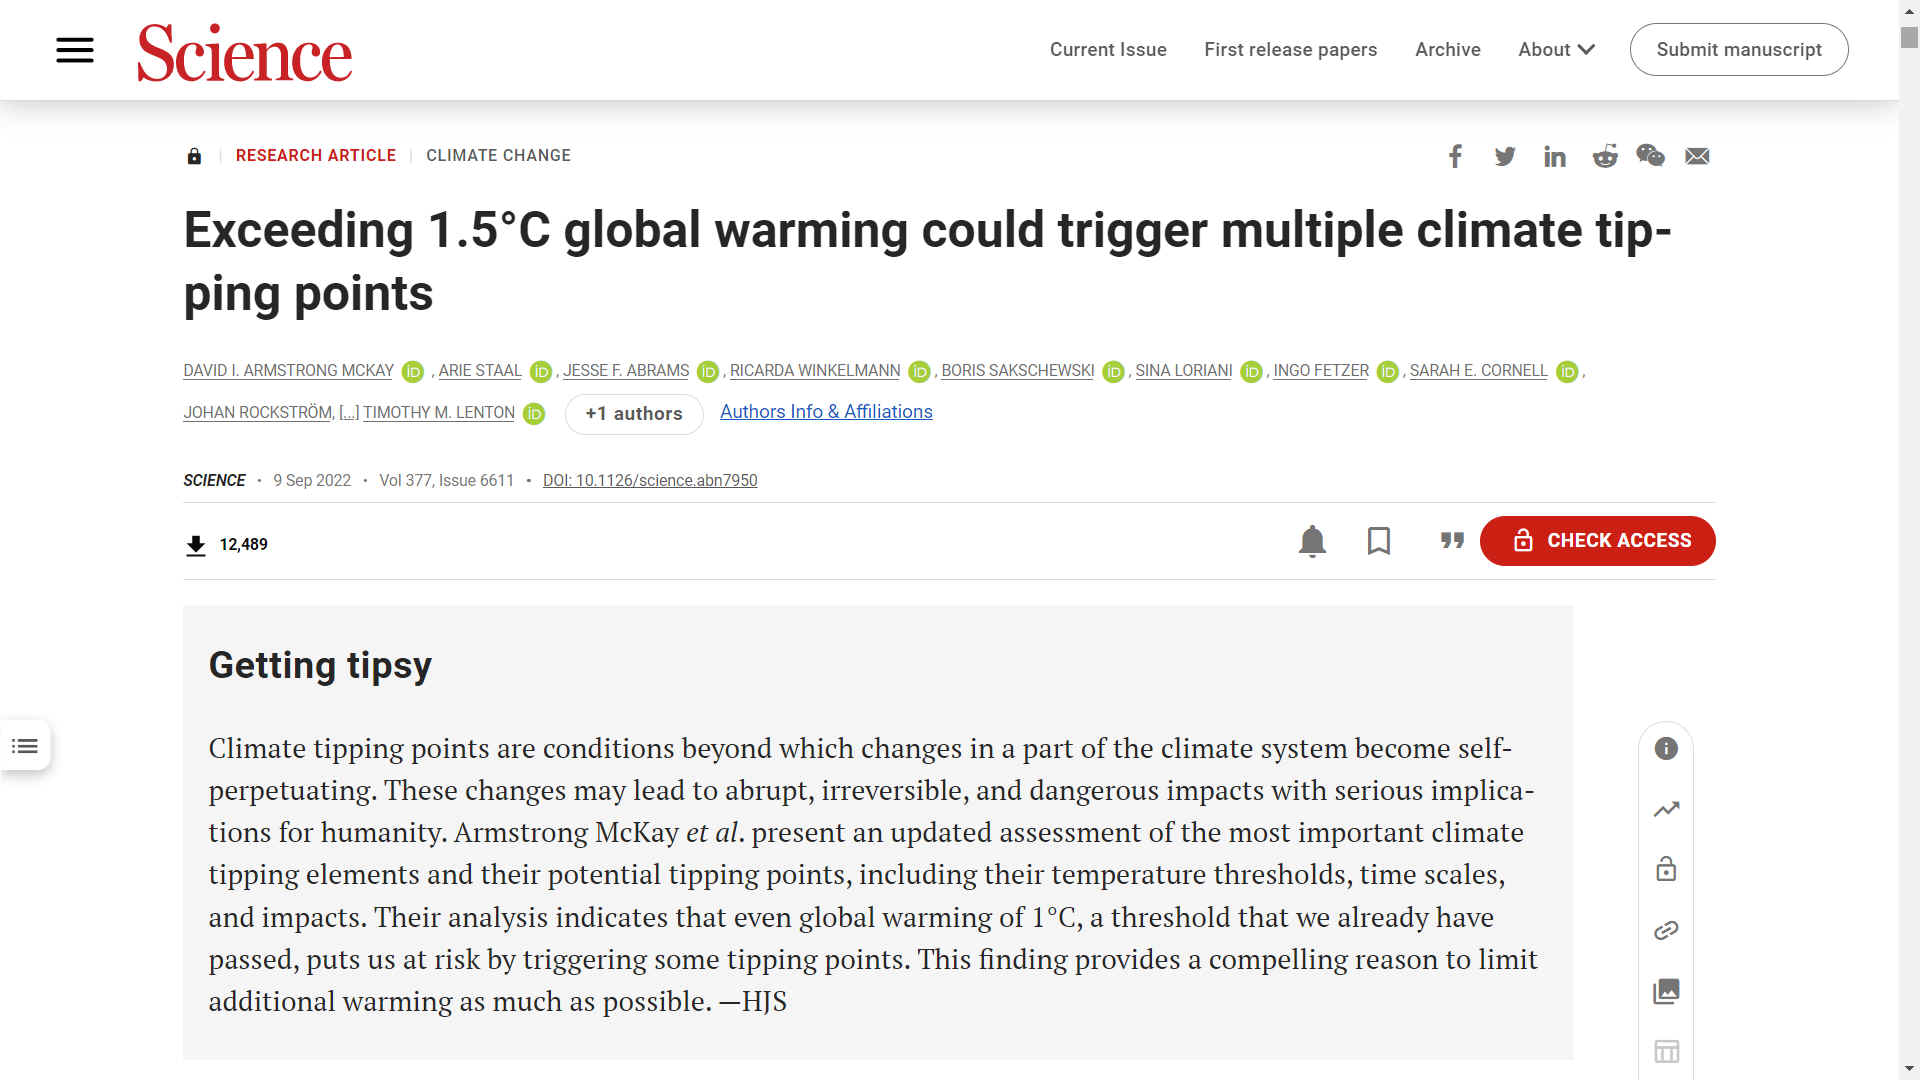 Exceeding 1.5 degrees centigrade global warming could trigger multiple tipping points